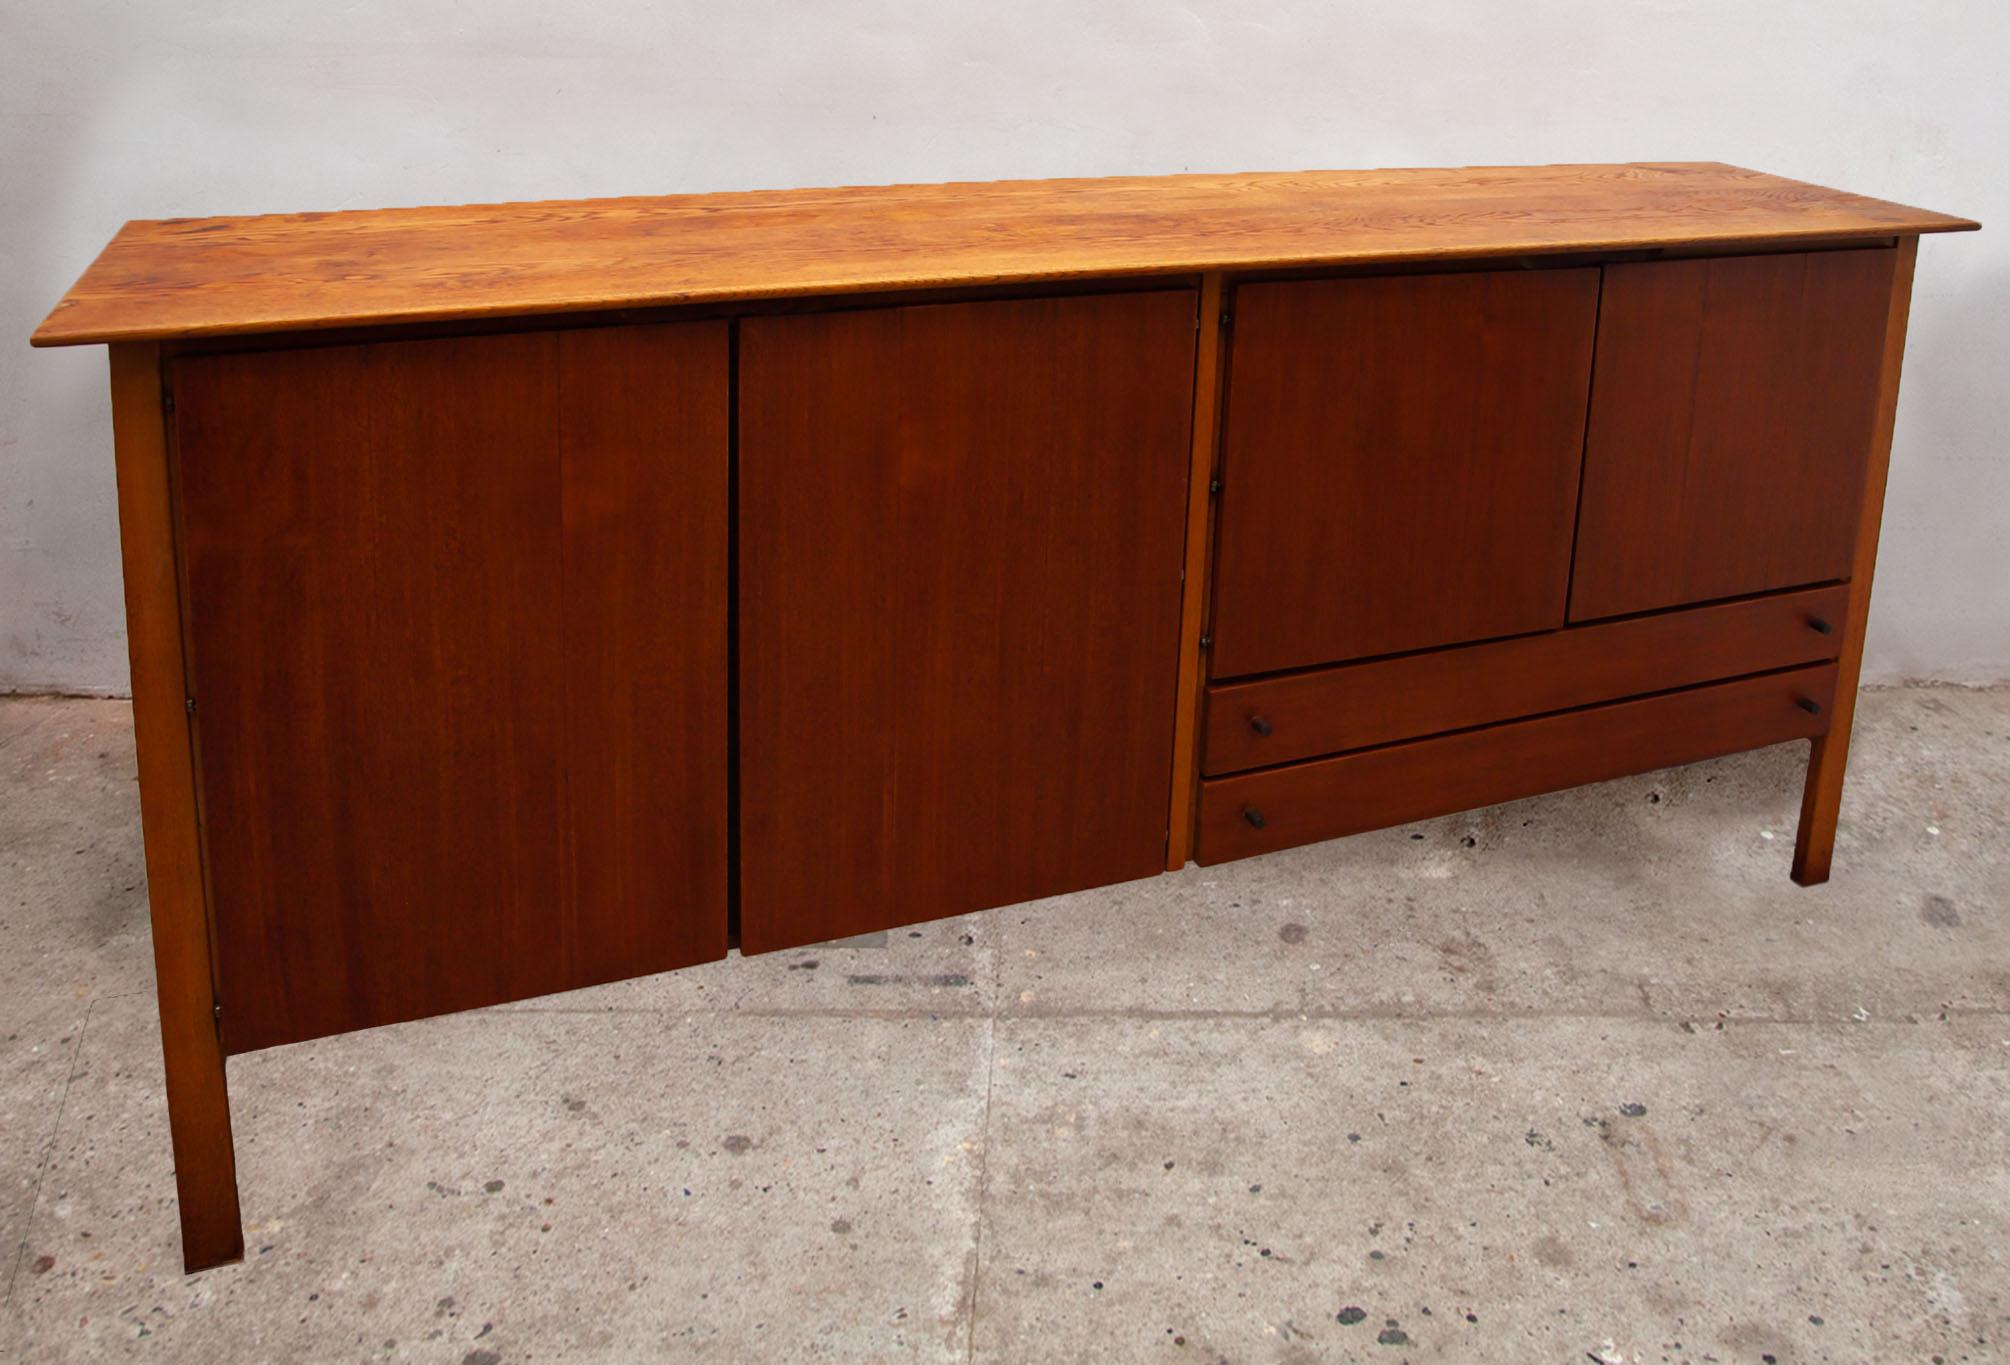 Hand-Crafted Large High Teak Sideboard with Floating Top 1950s, Made in Denmark For Sale